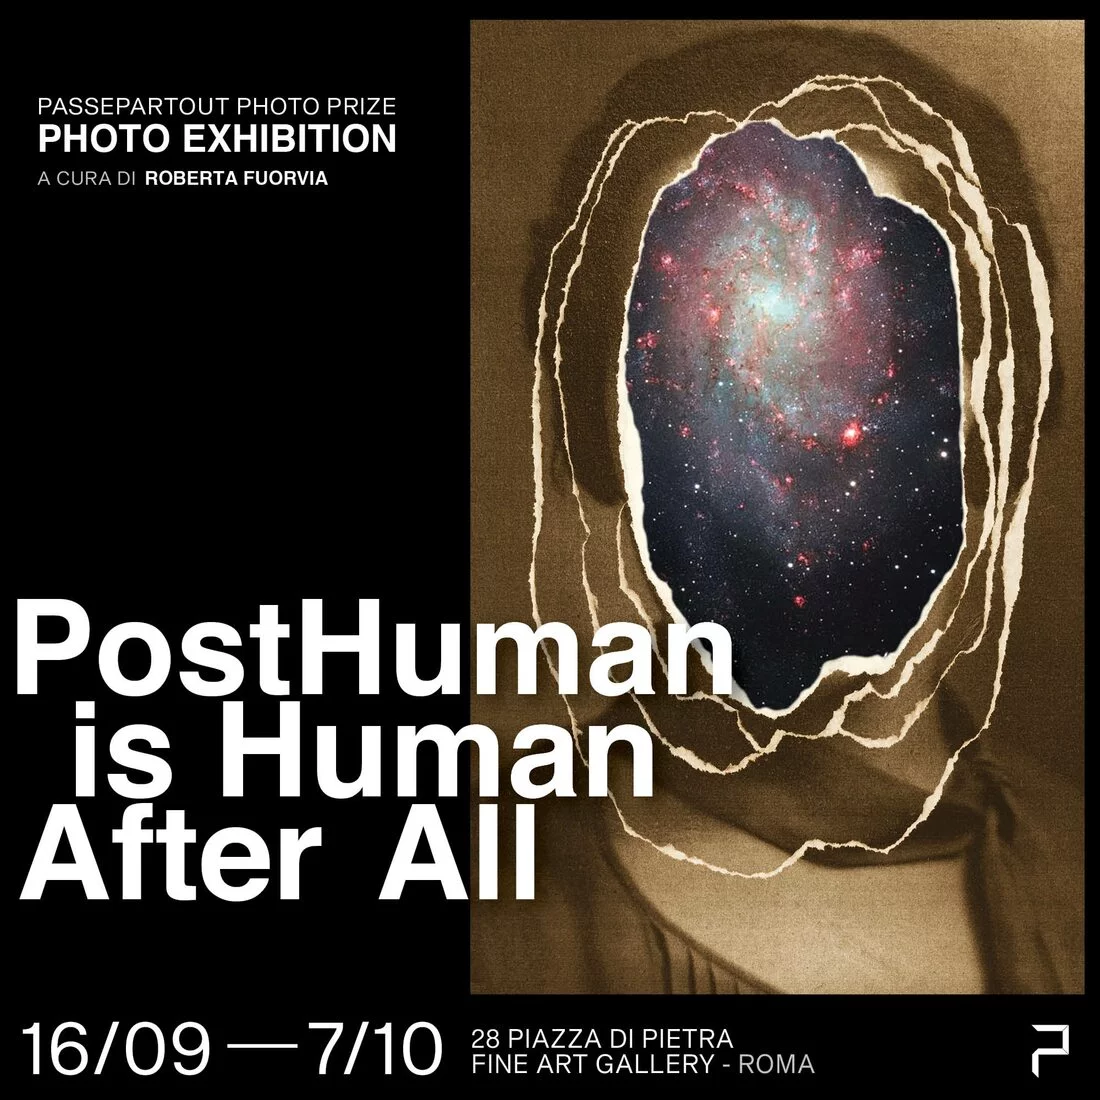 Passepartout Photo Prize, PostHuman is Human after all